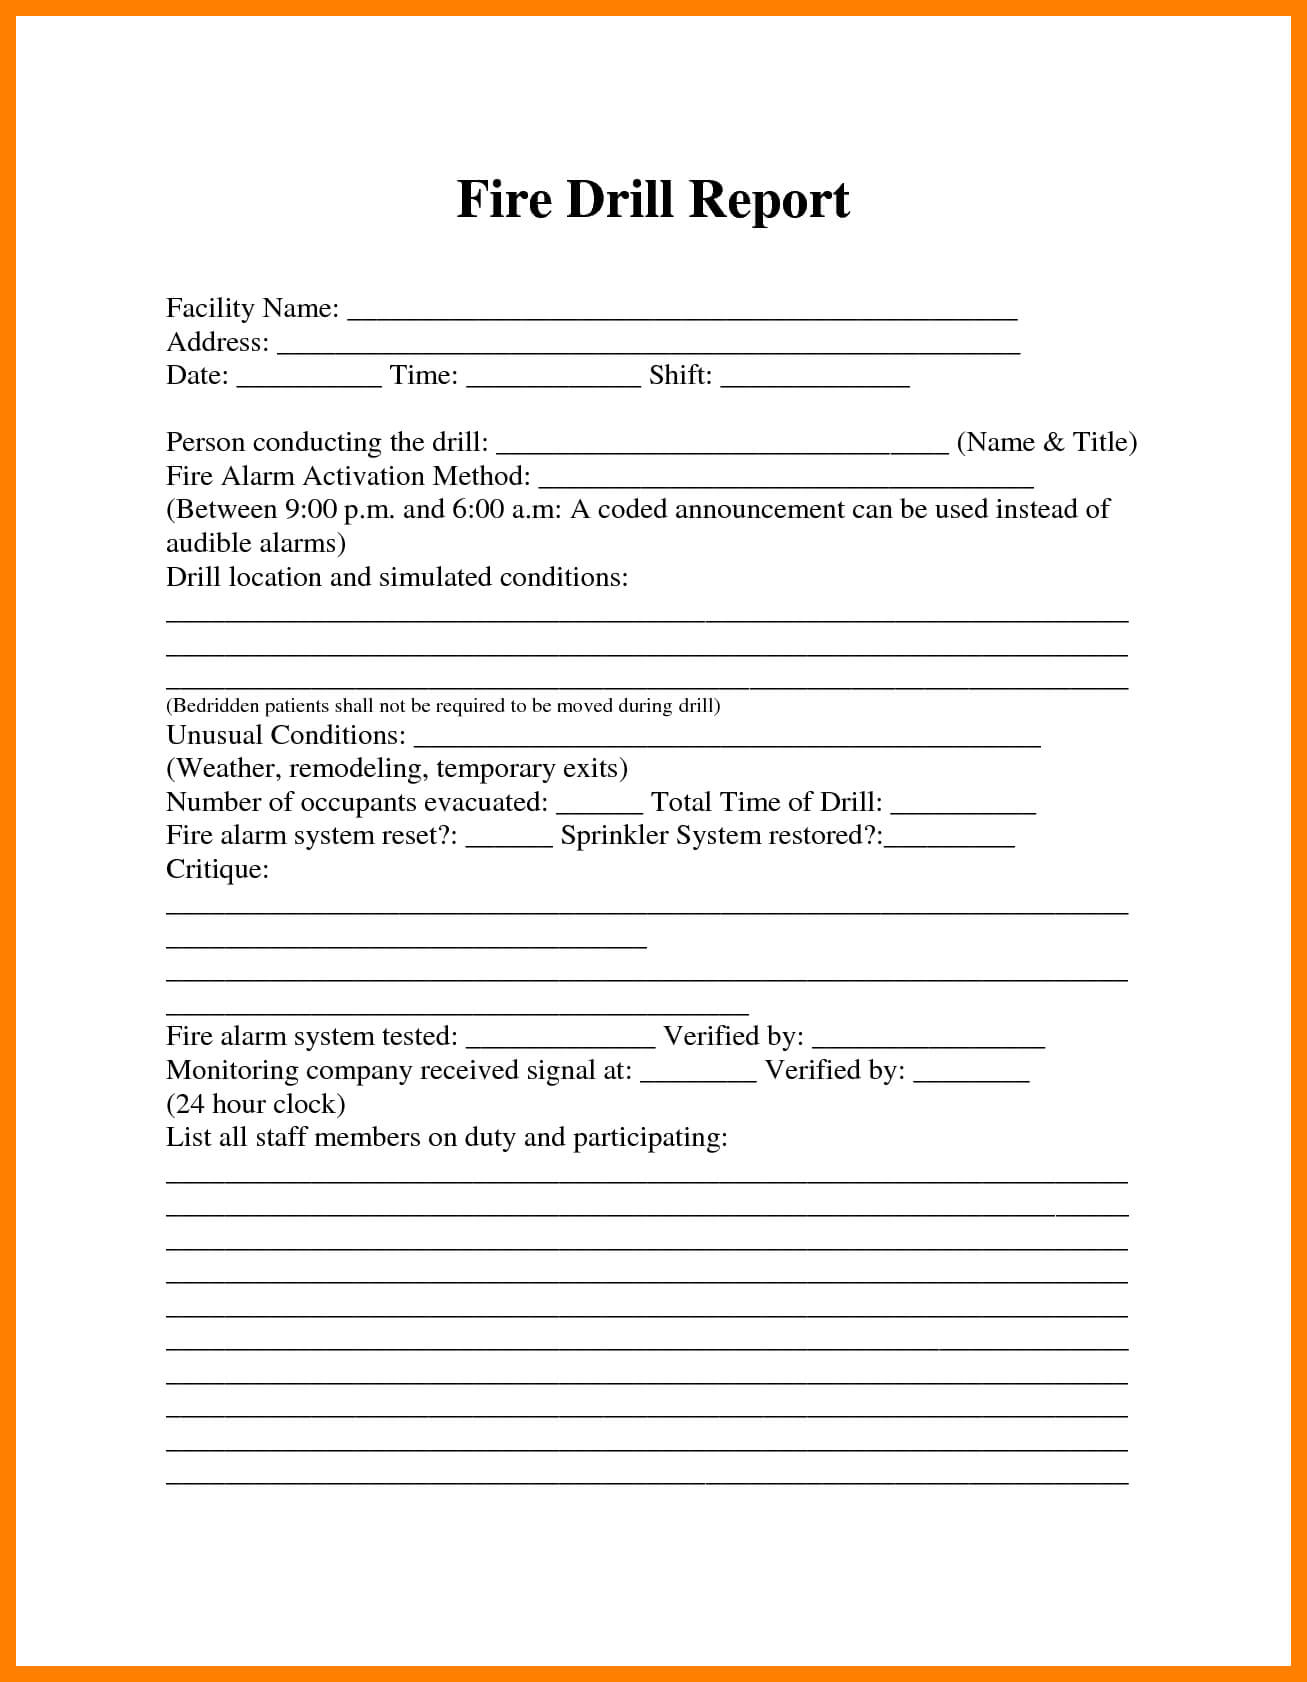 Image Result For Fire Drill Procedures For Summer Camp In Fire Evacuation Drill Report Template